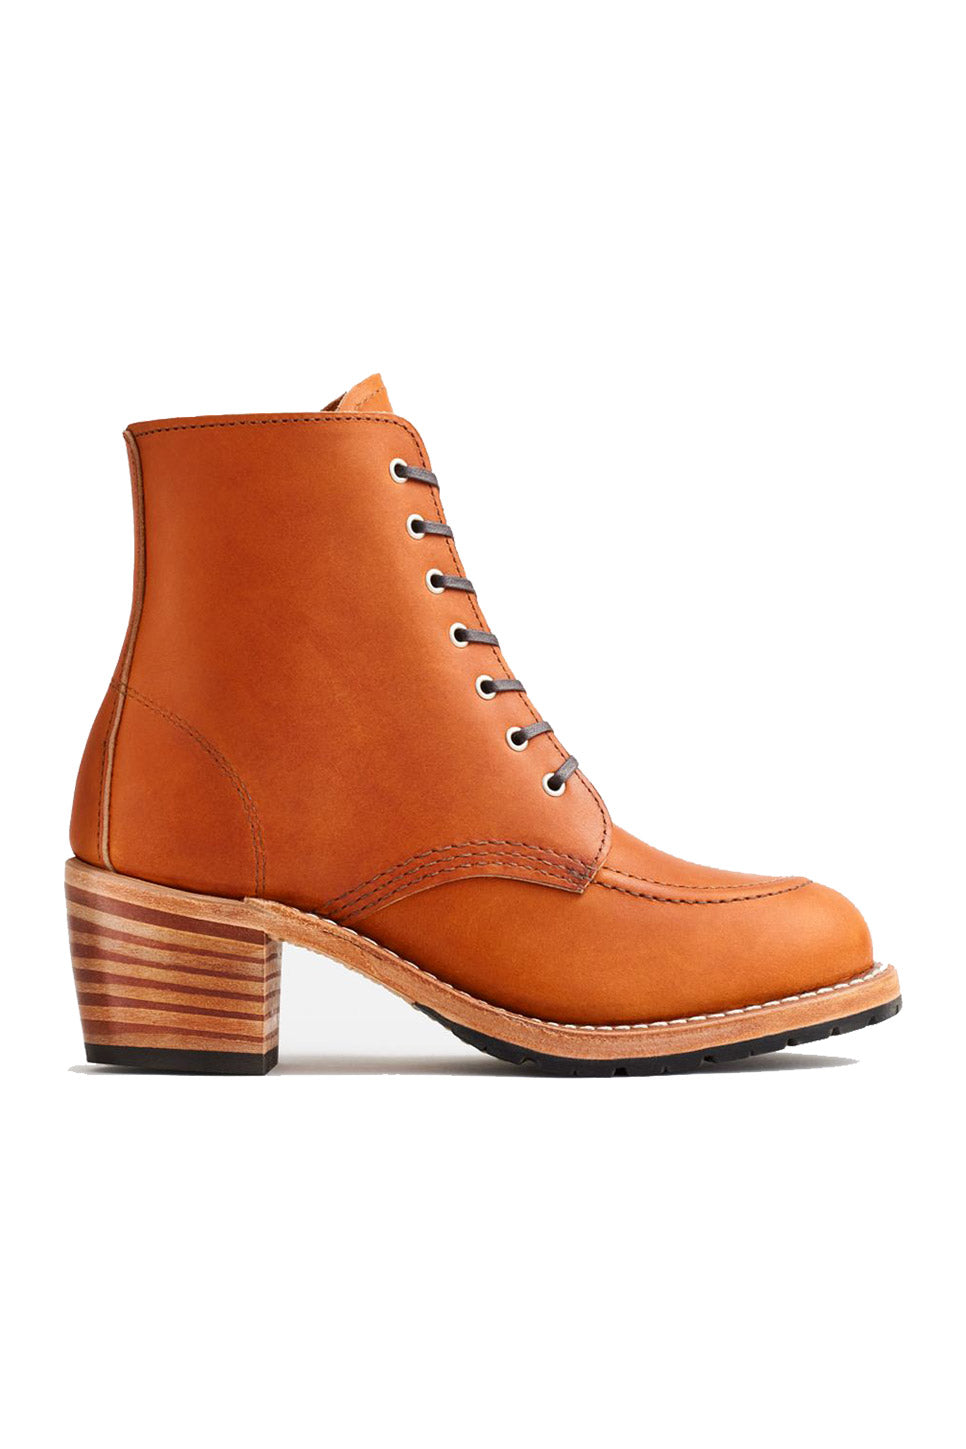 Red Wing - Clara - Oro - Side